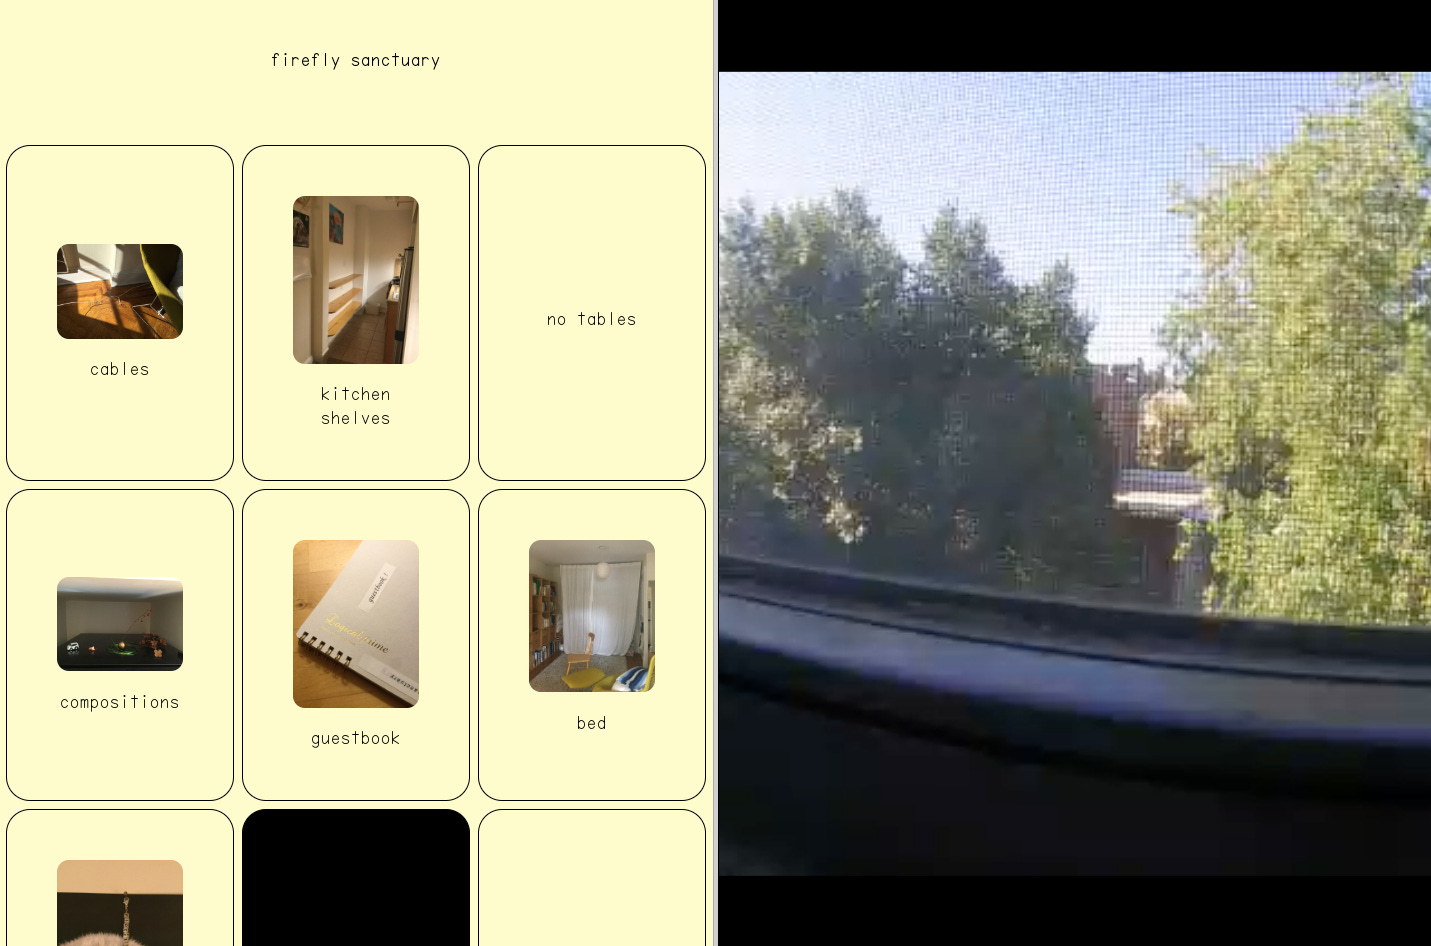 A screenshot of a website: on the left side, a grid of rounded rectangles, like doors to different rooms. One says cables, another says kitchen shelves, another says no tables. on the right side, a livestream from a camera pointed out a window. there is a screen, and beyond the window there are two trees.